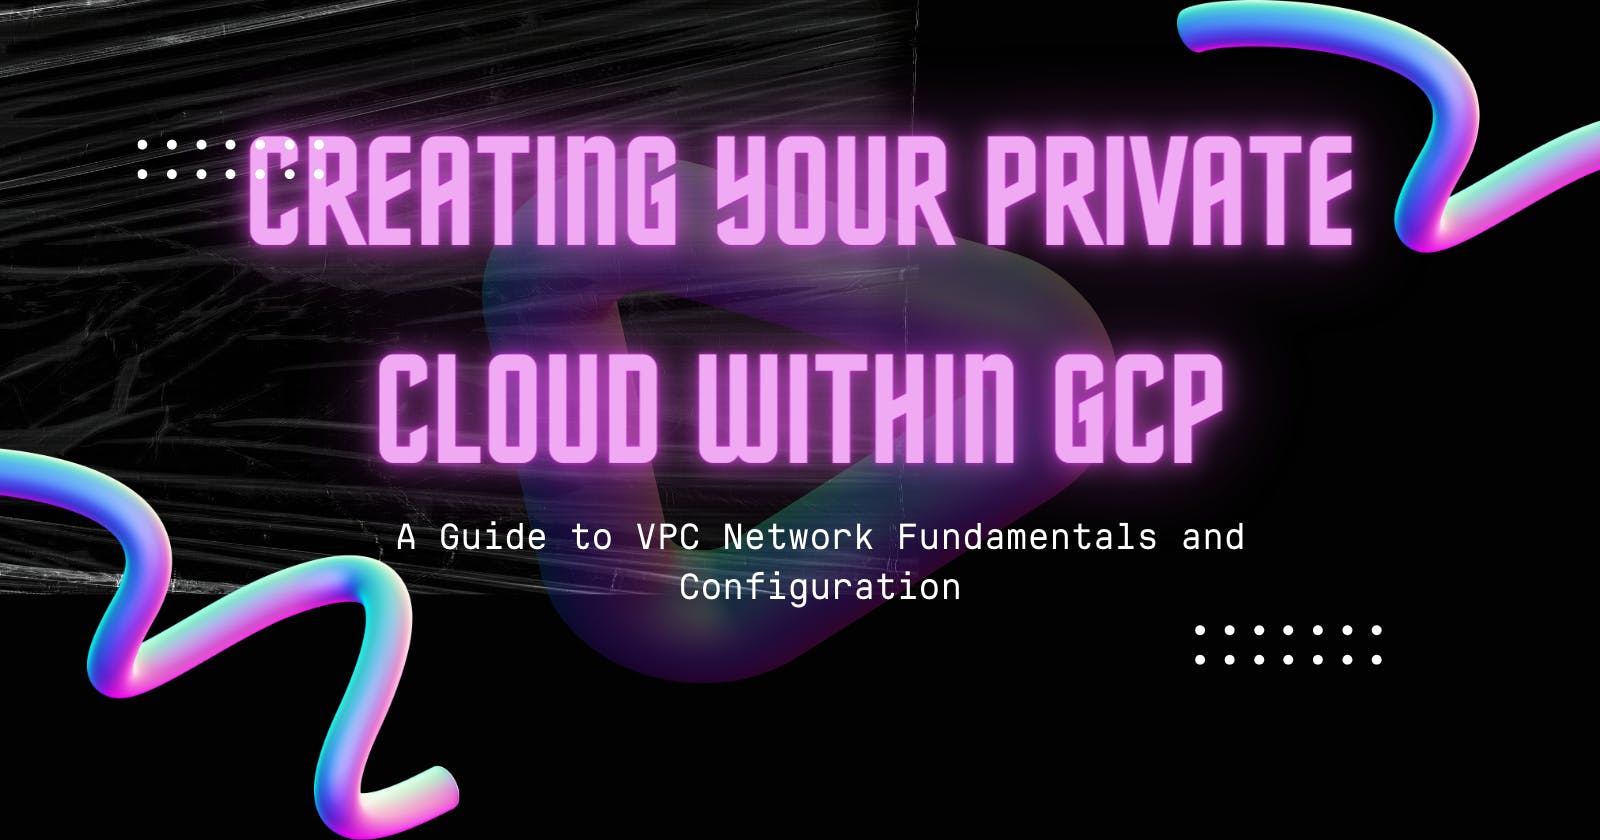 Creating Your Private Cloud Within GCP